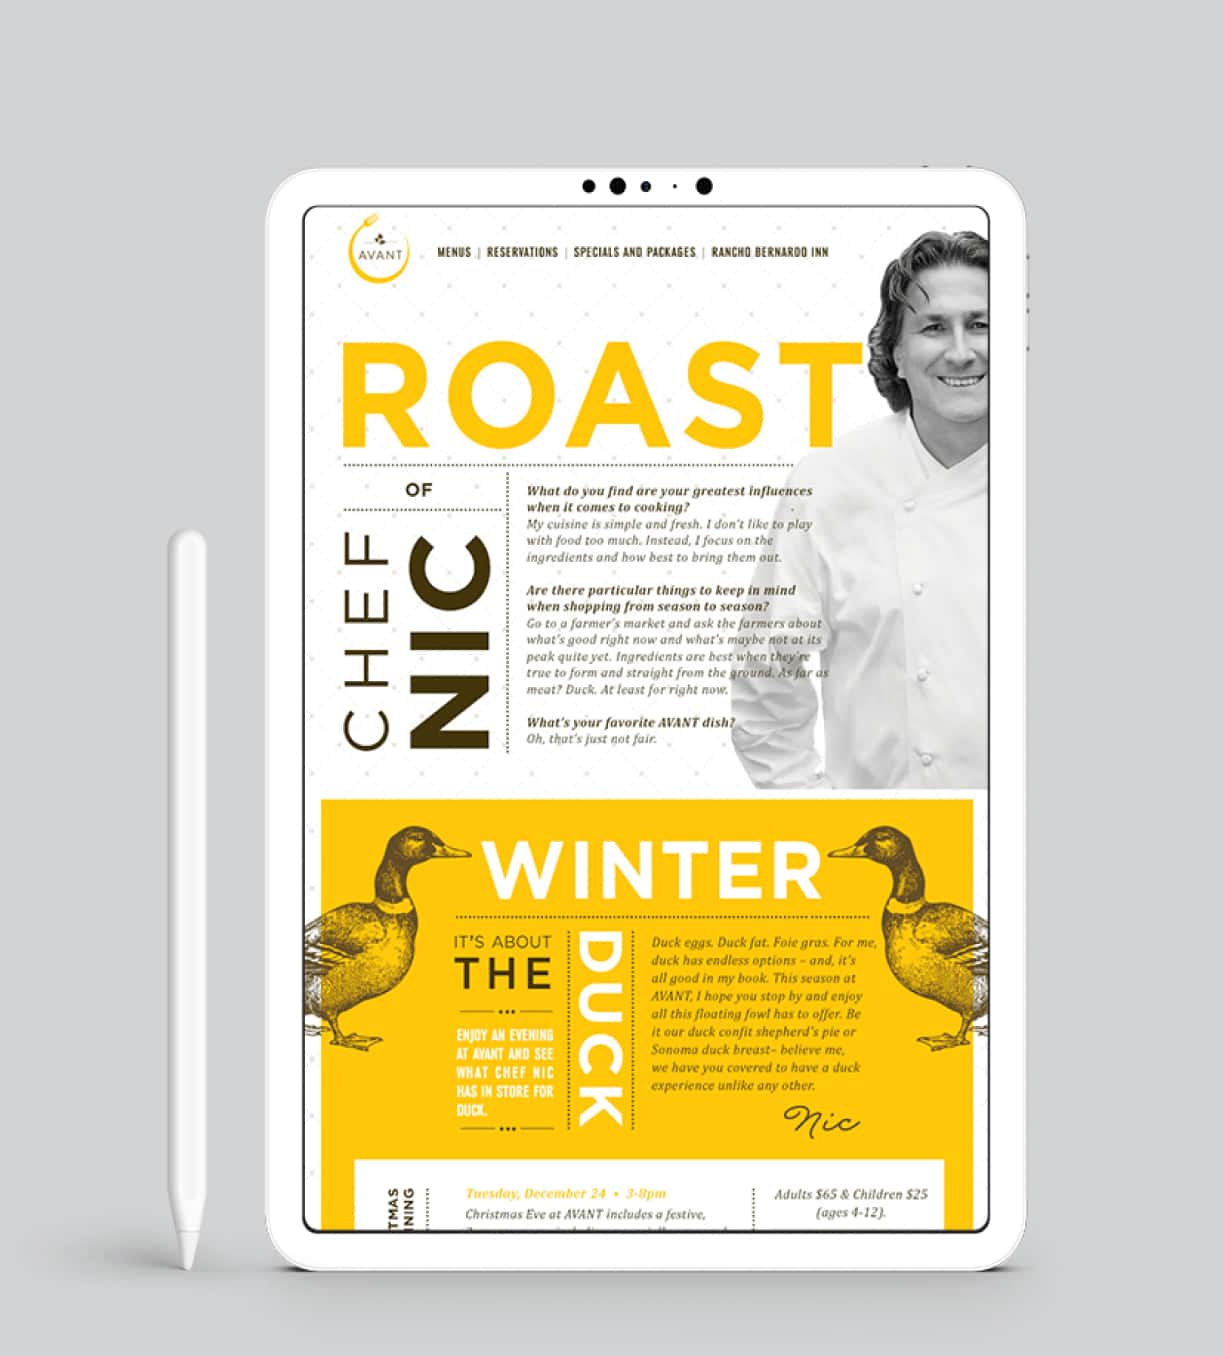 A digital tablet displaying a page titled 'ROAST' featuring the chef 'NIC' with winter recipes and promotional text for AVANT restaurant, including images of a duck, suggesting gourmet offerings.